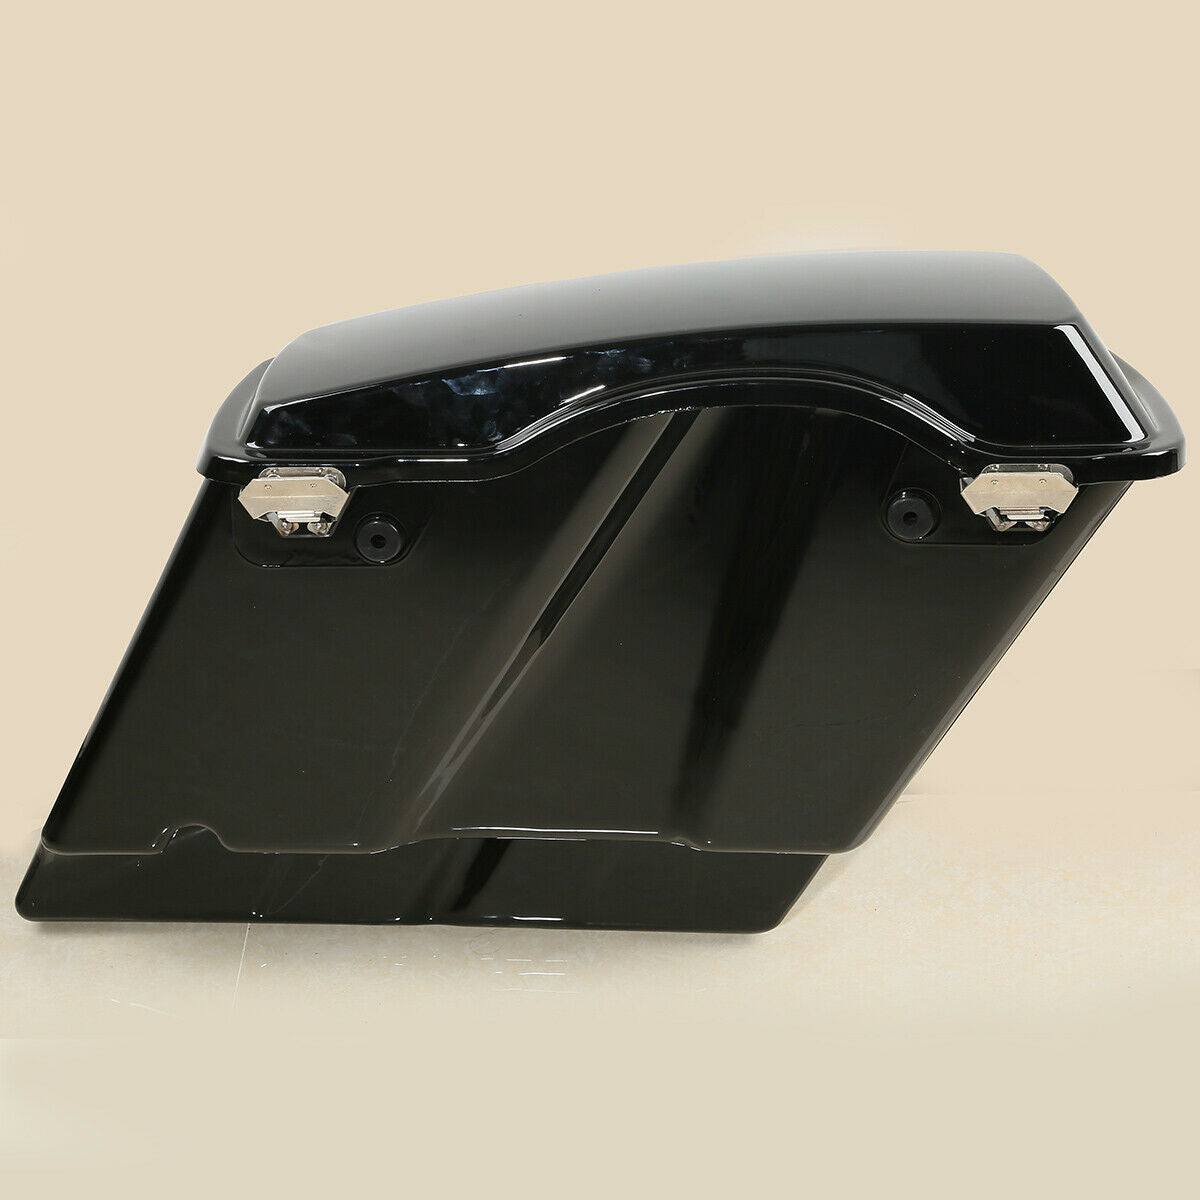 5" Stretched Extended Hard Saddlebags For Harley Electra Glide Road King 93-13 - Moto Life Products